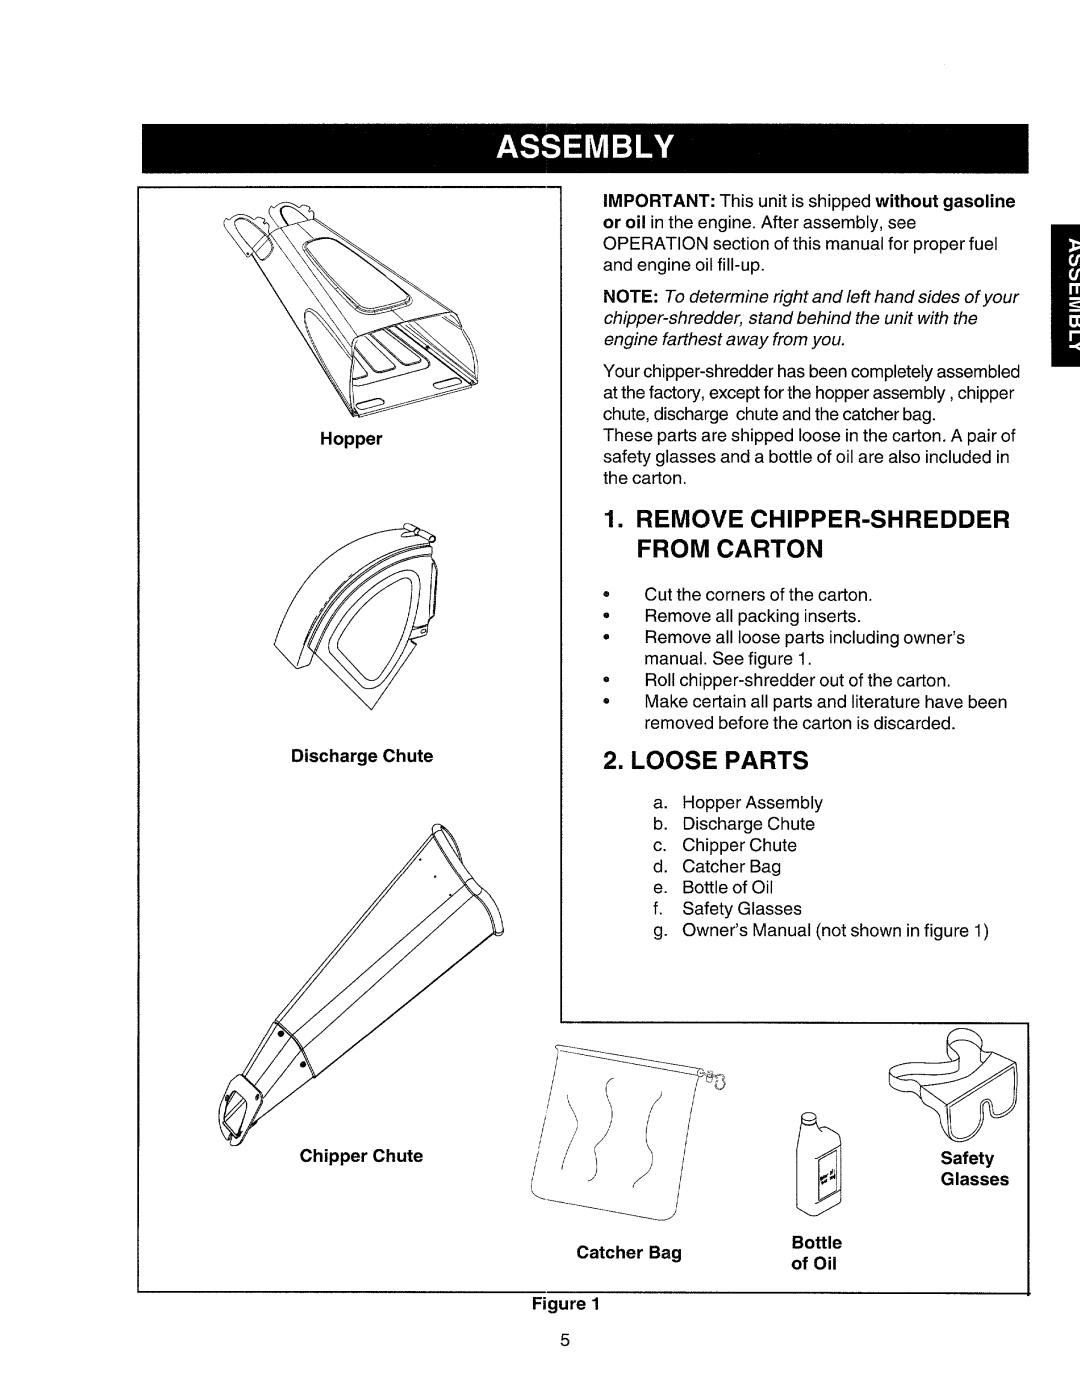 Craftsman 247.77586 manual Remove Chipper-Shredder From Carton, Loose Parts, Hopper Discharge Chute, Chipper Chute, Figure 